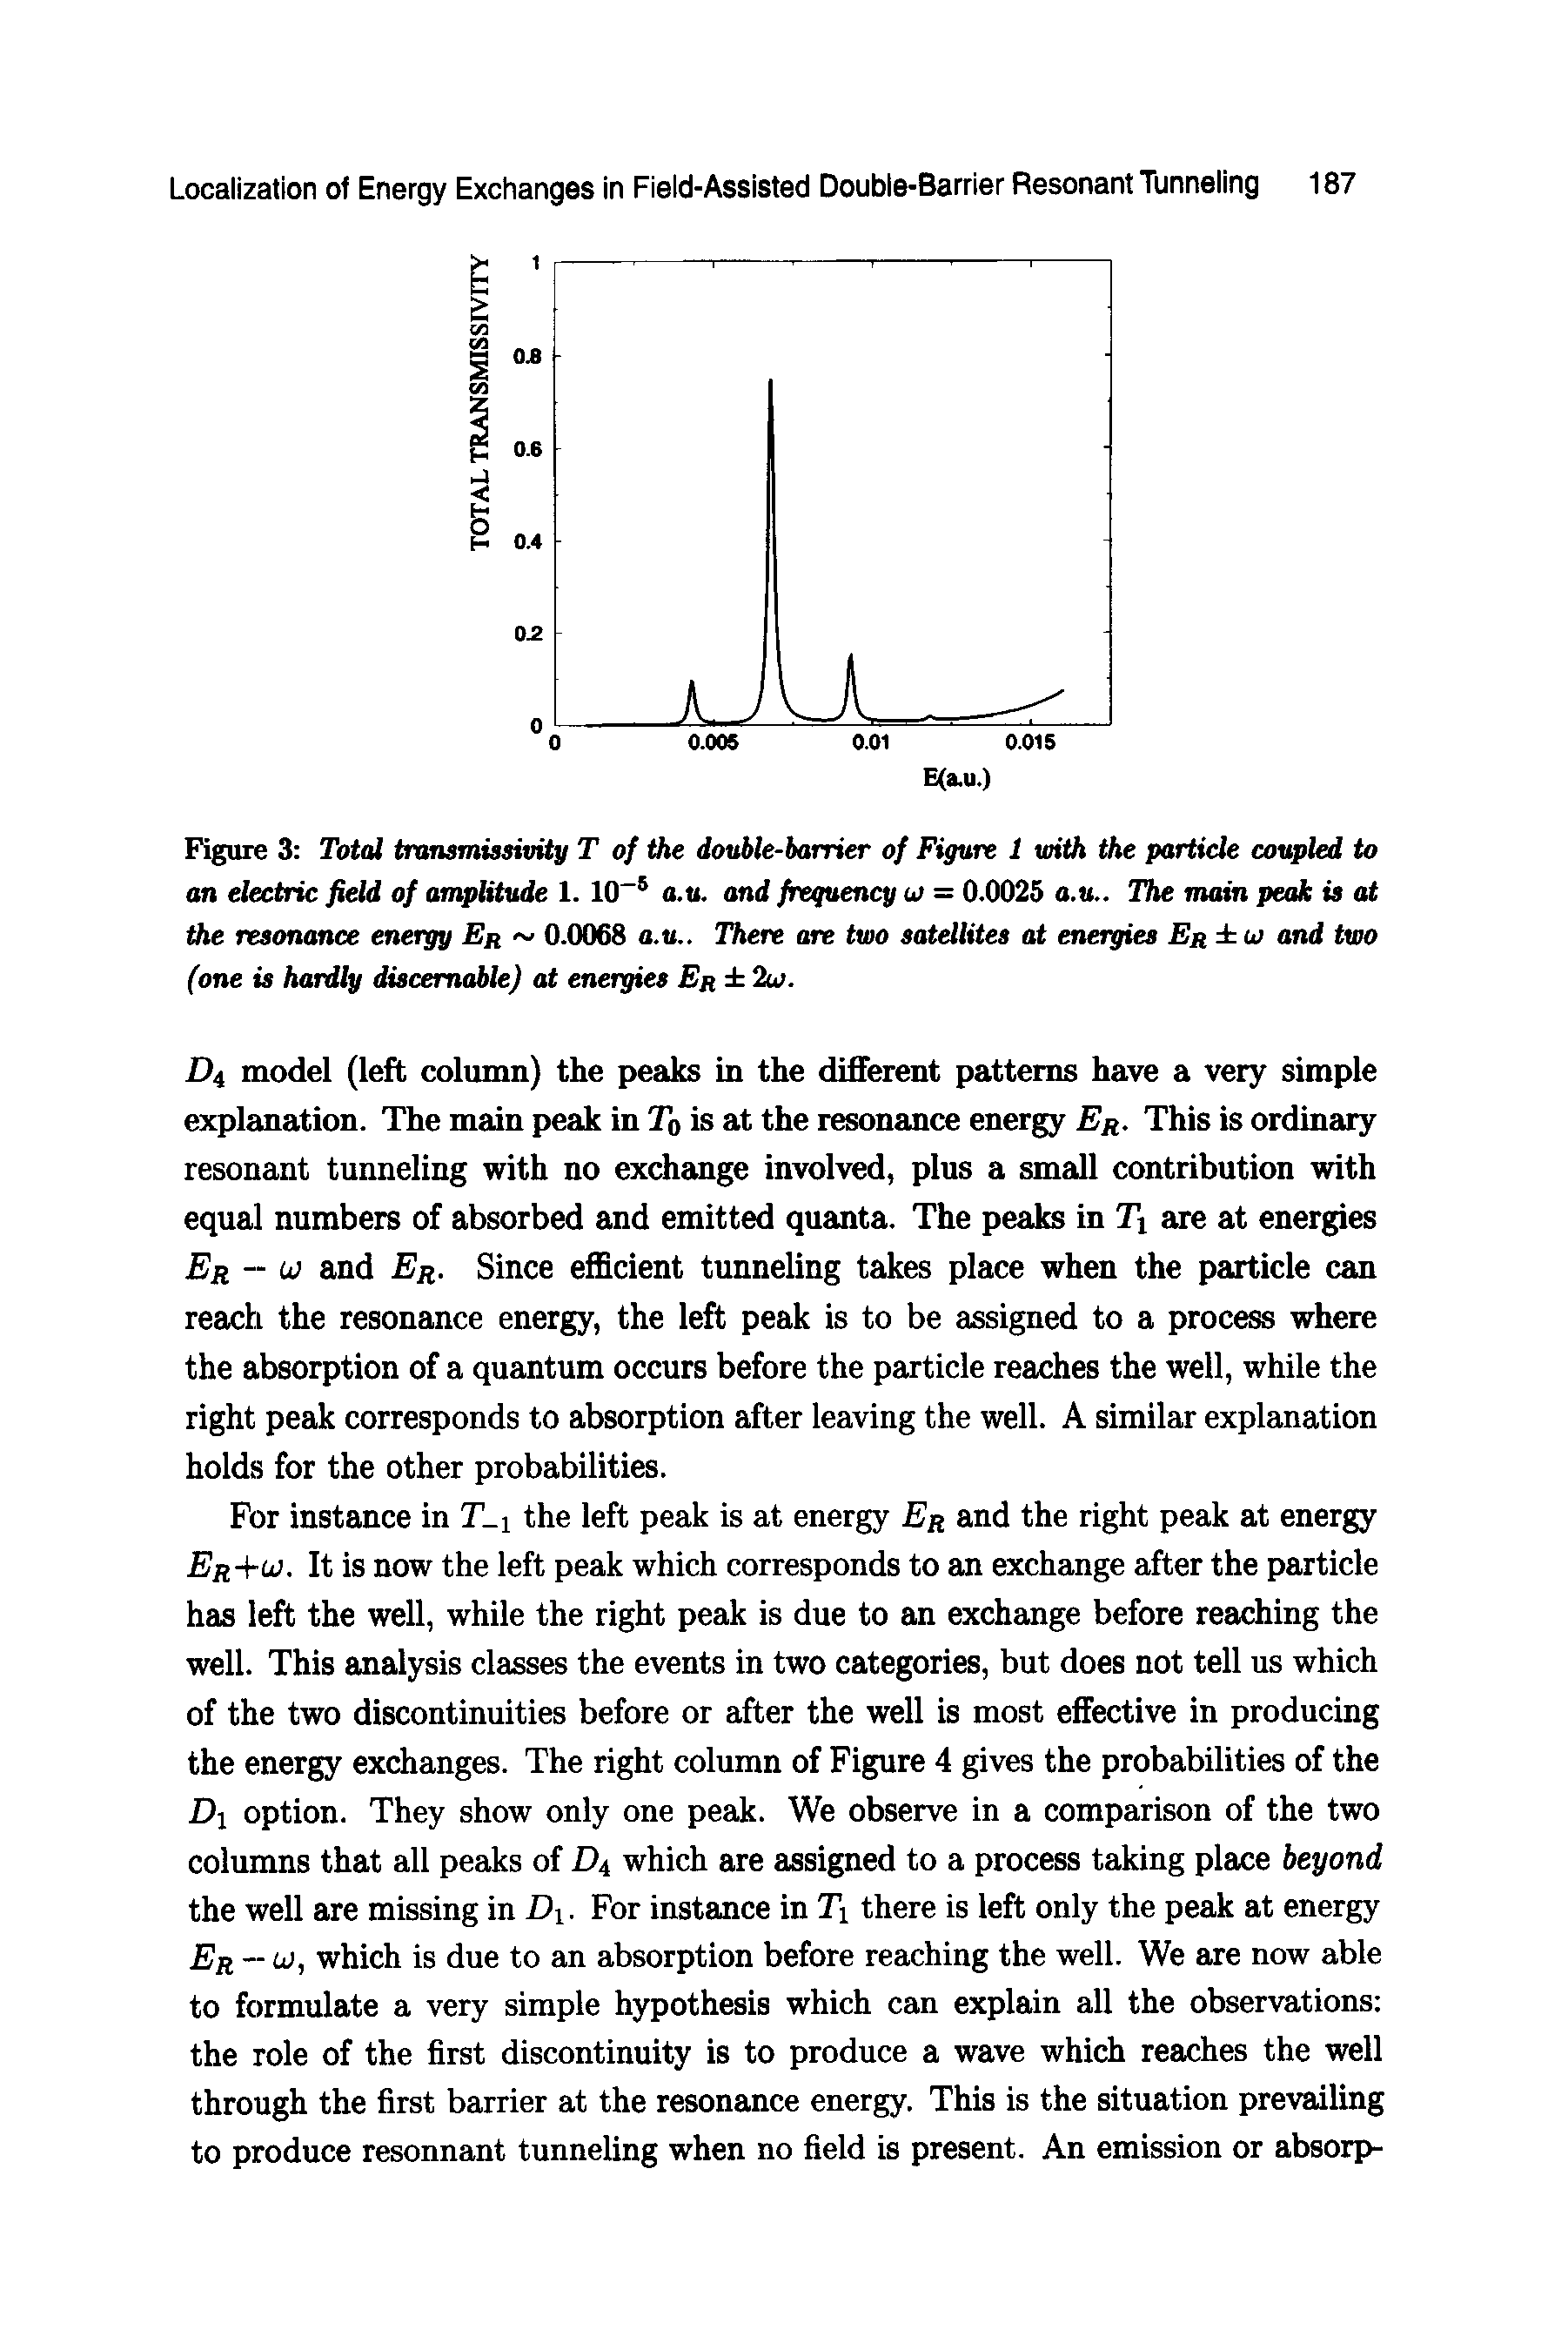 Figure 3 Total transmissivity T of the dovble-barrier of Figure 1 with the particle coupled to an electric field of amplitude 1. 10 s a.u. and frequency u = 0.0025 a.u.. The main peak is at the resonance energy Er 0.0068 a.u.. There are two satellites at energies Er ui and two (one is hardly discemable) at energies Er 2u>.